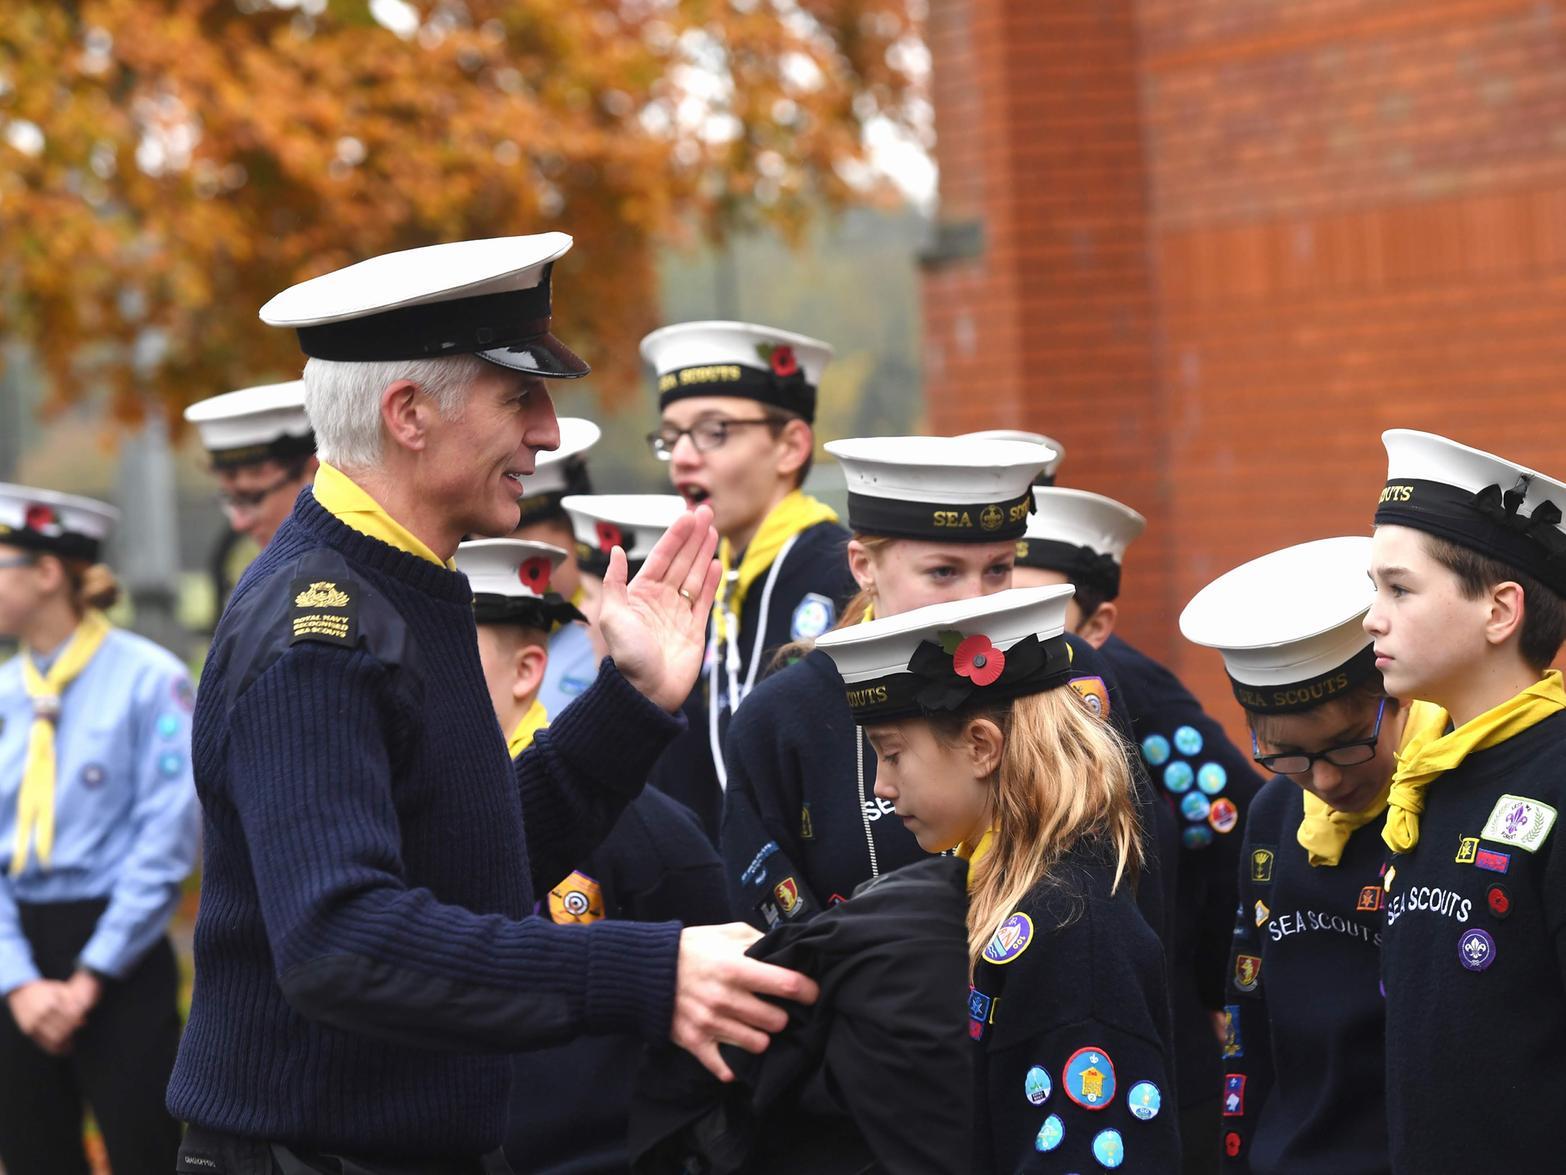 Photos from the 2nd Warwick Sea Scots ceremony.